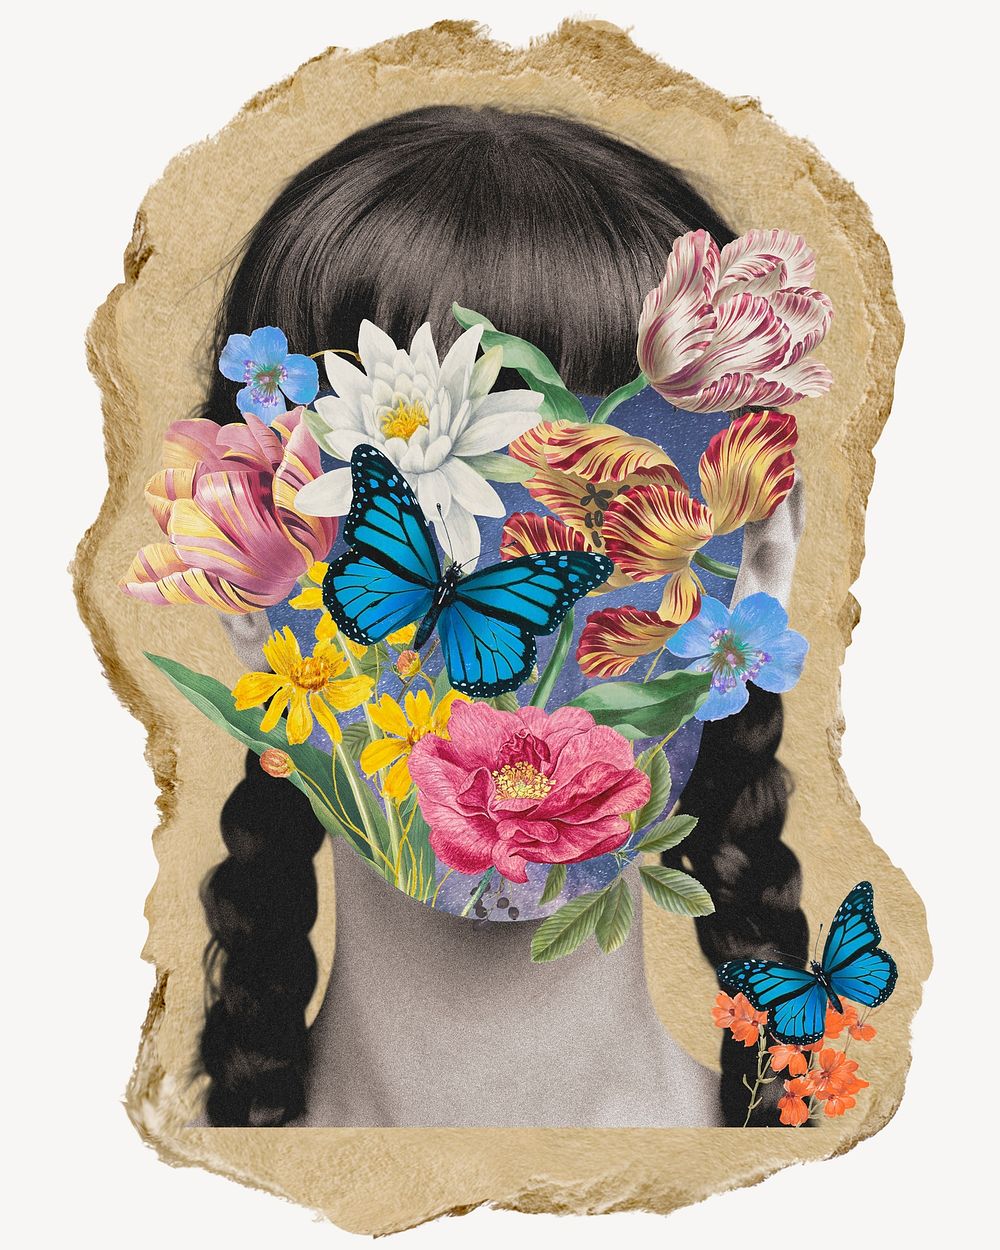 Surreal floral woman, ripped paper collage element